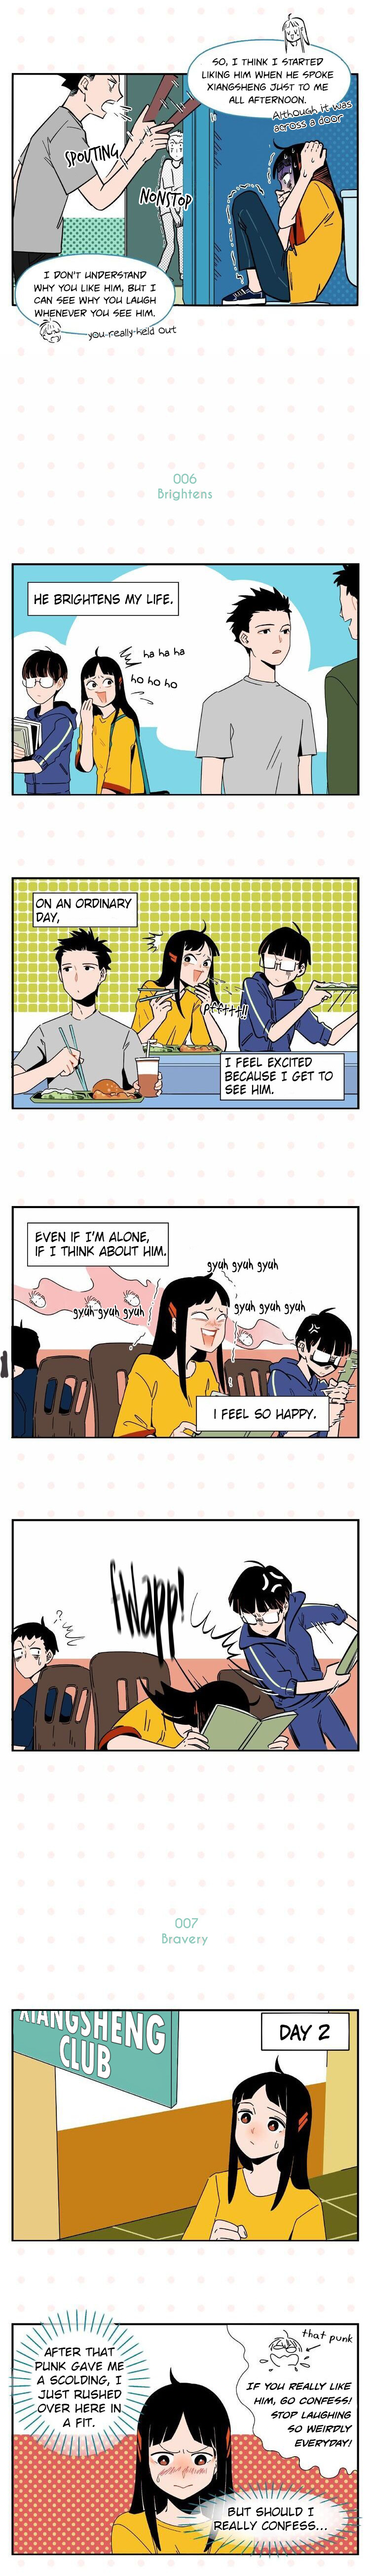 Chang Le Makes Me Unable to Confess Ch. 1 Just Seeing you Makes Me Laugh